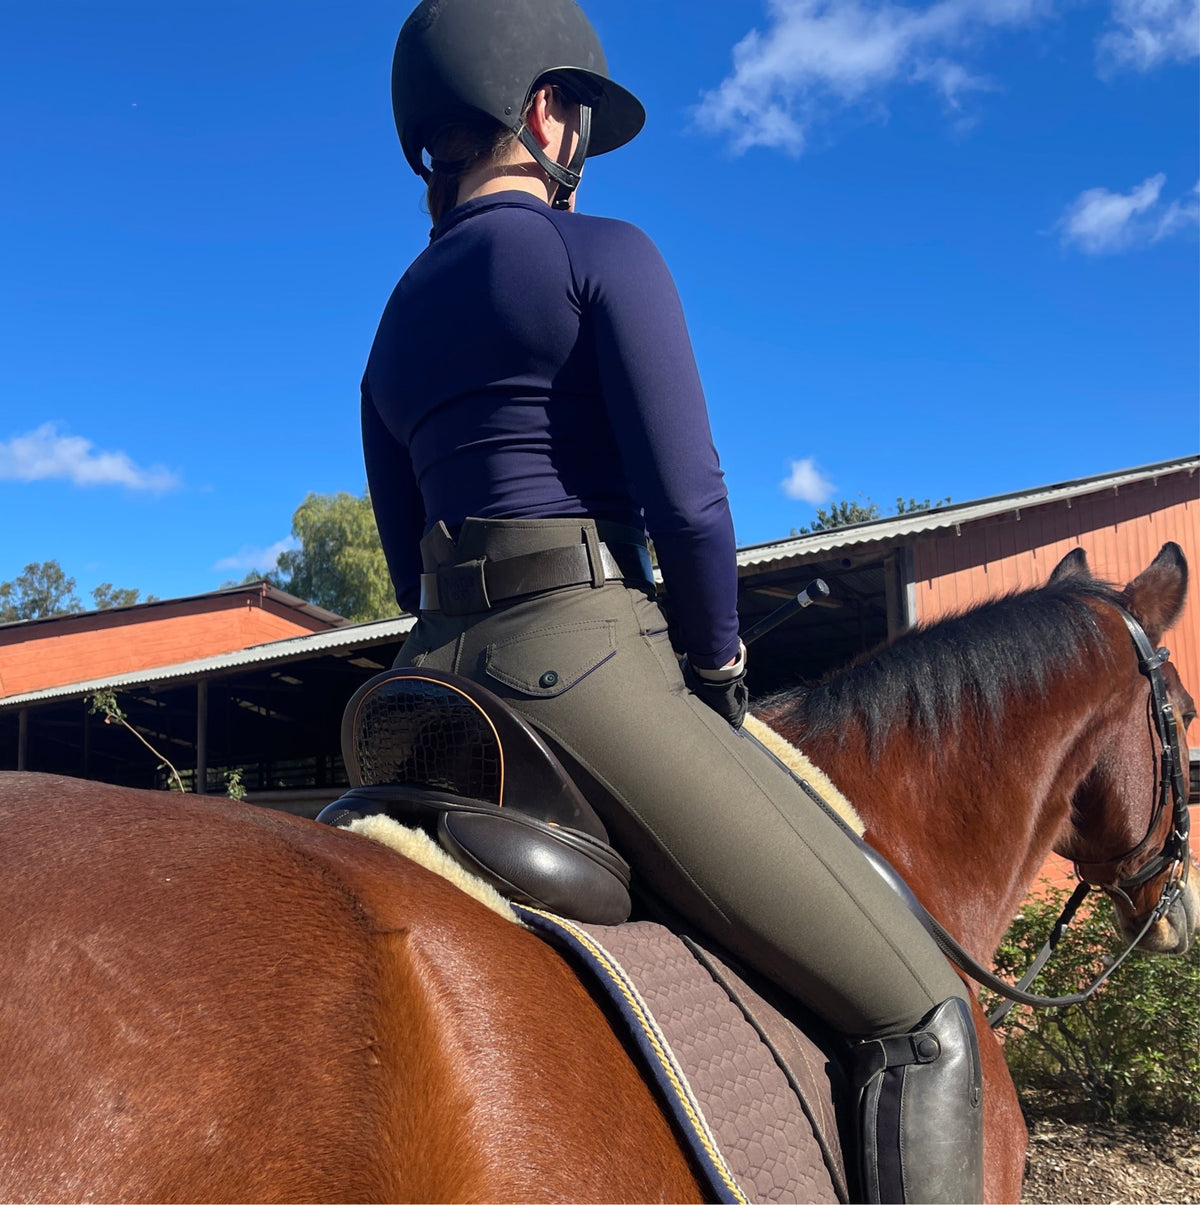 Perfection 2.0 - Olive Green with Navy Piping High Waist Full Seat Breeches